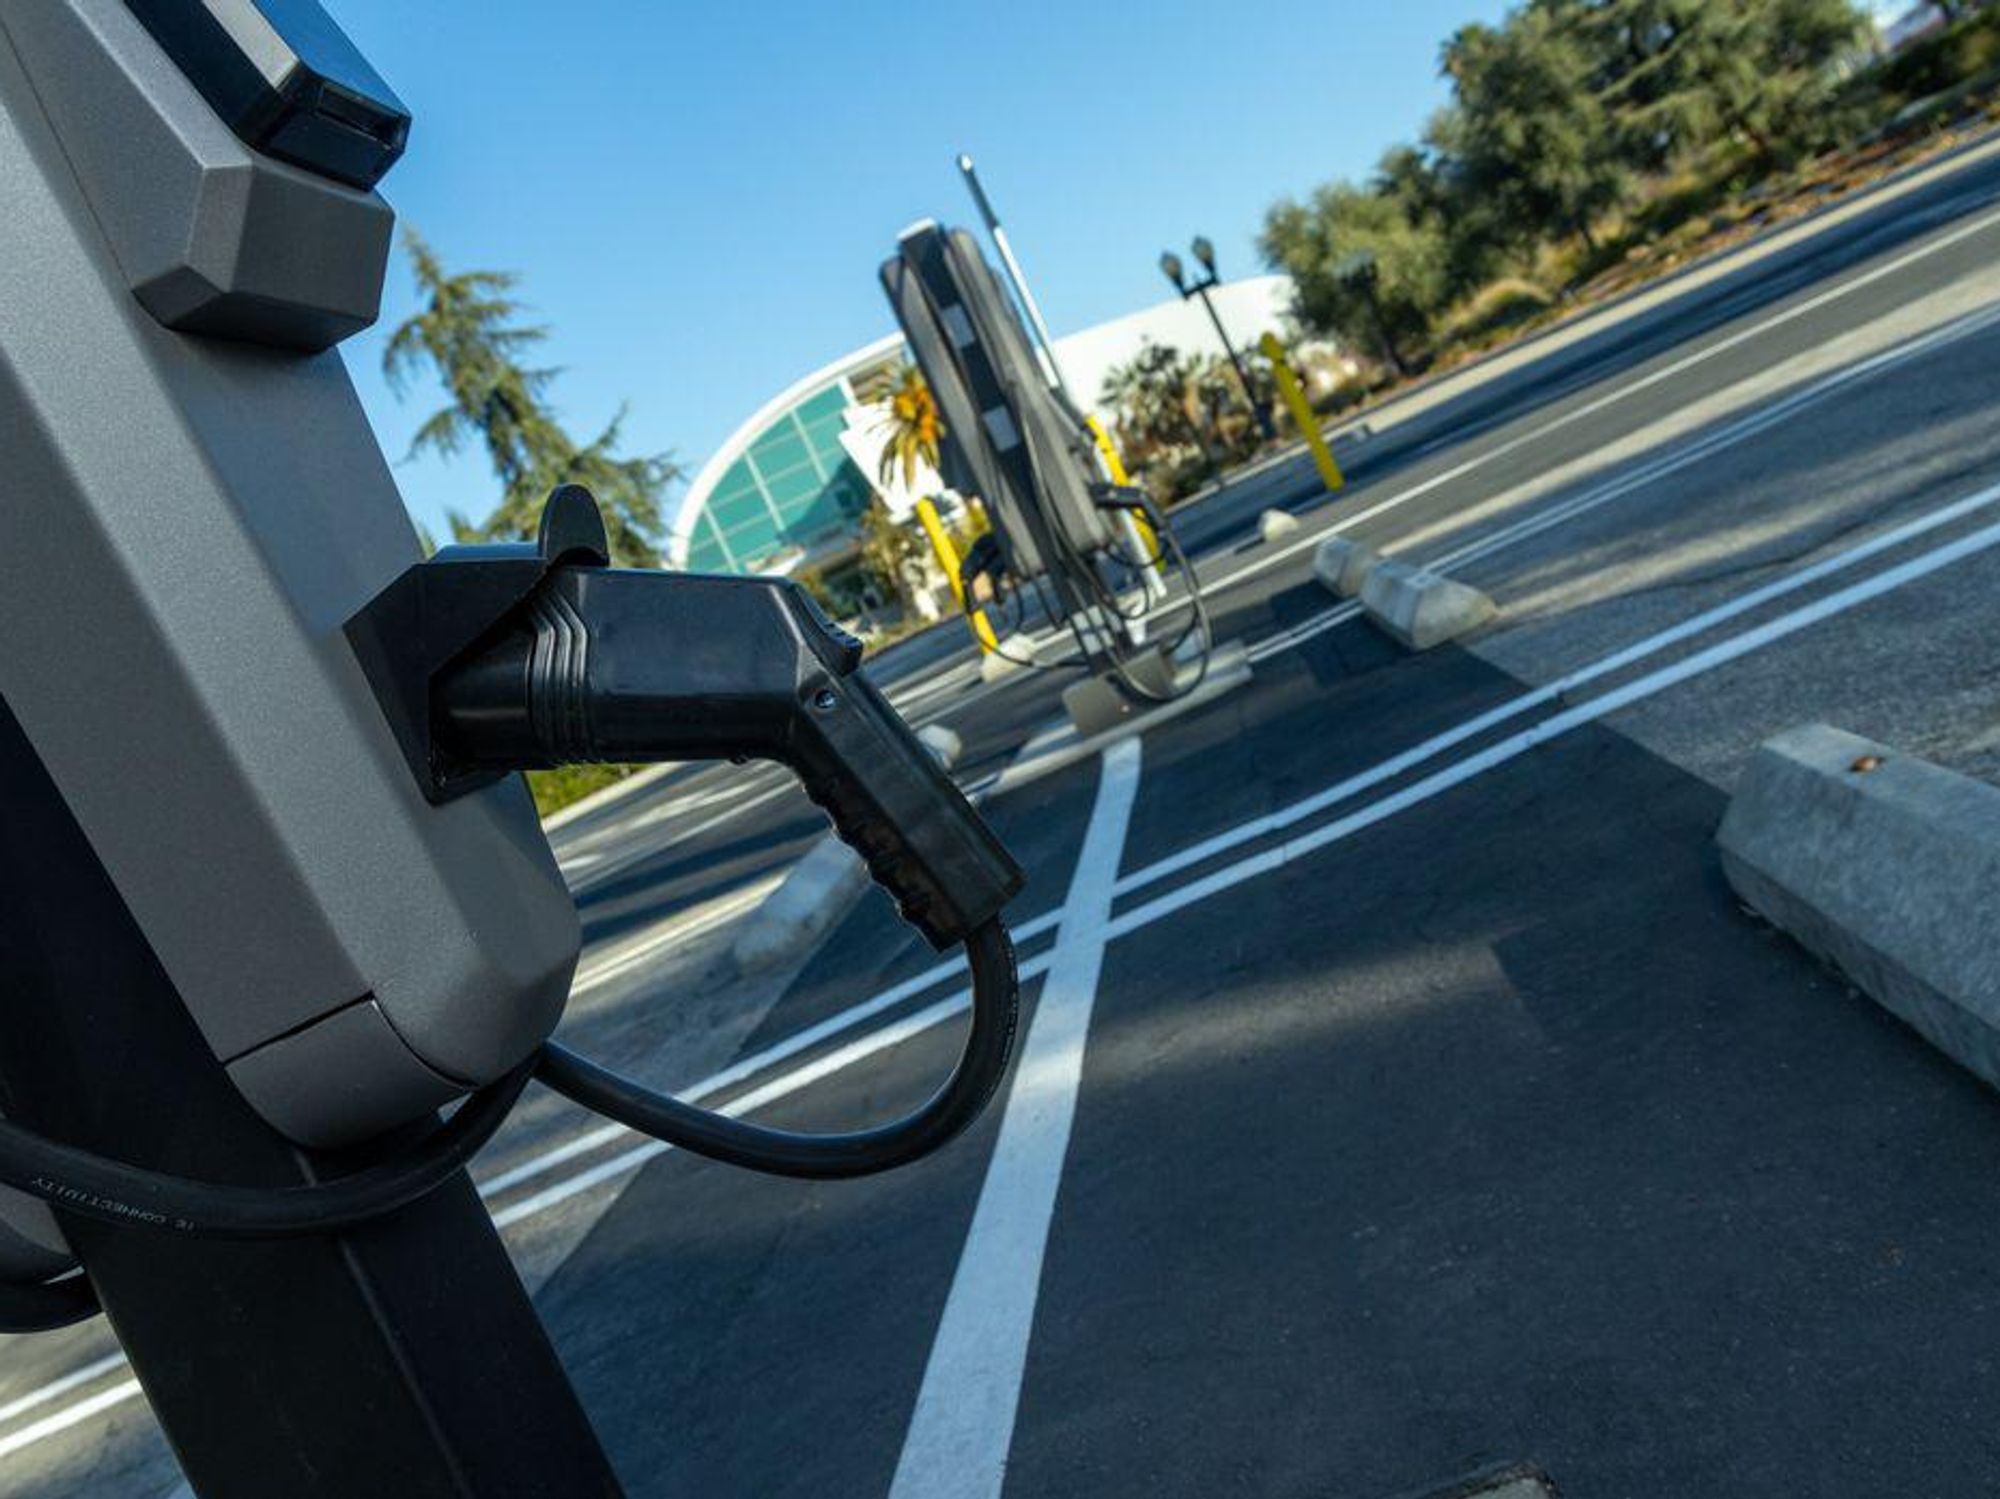 How SoCal Edison Plans to Build 38,000 EV Chargers Across Southern California